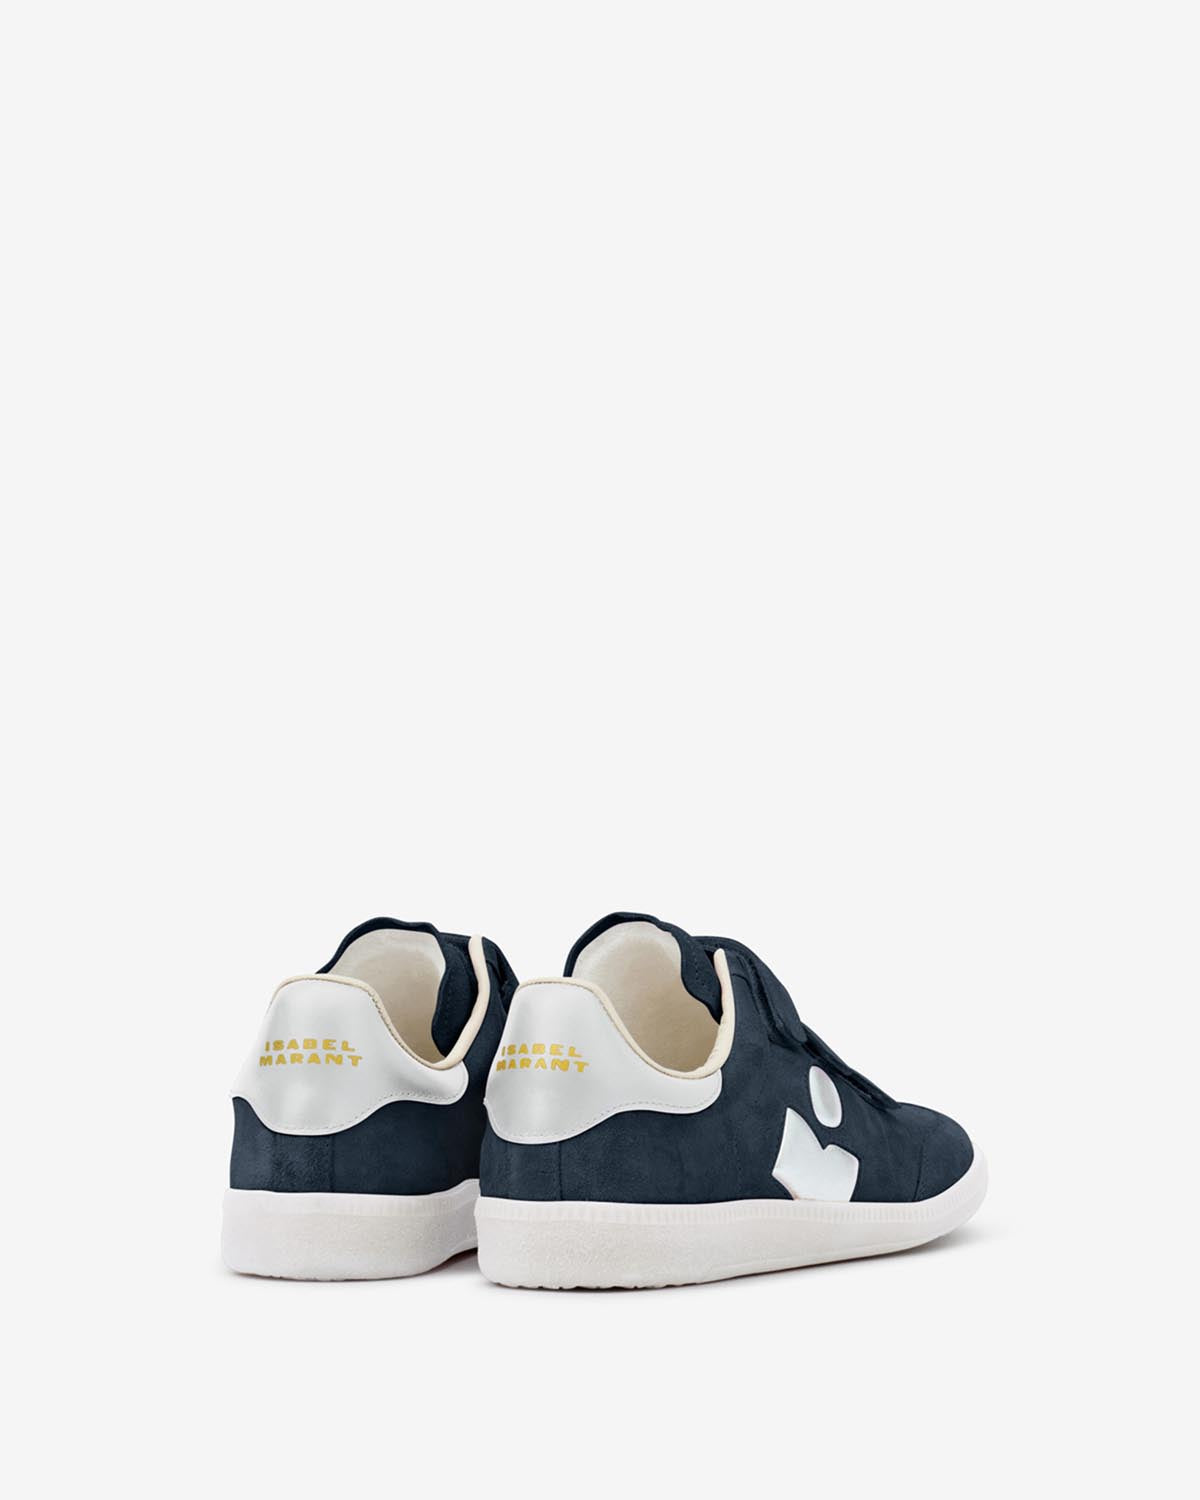 Sneakers Woman and Man | ISABEL MARANT Official Online Store